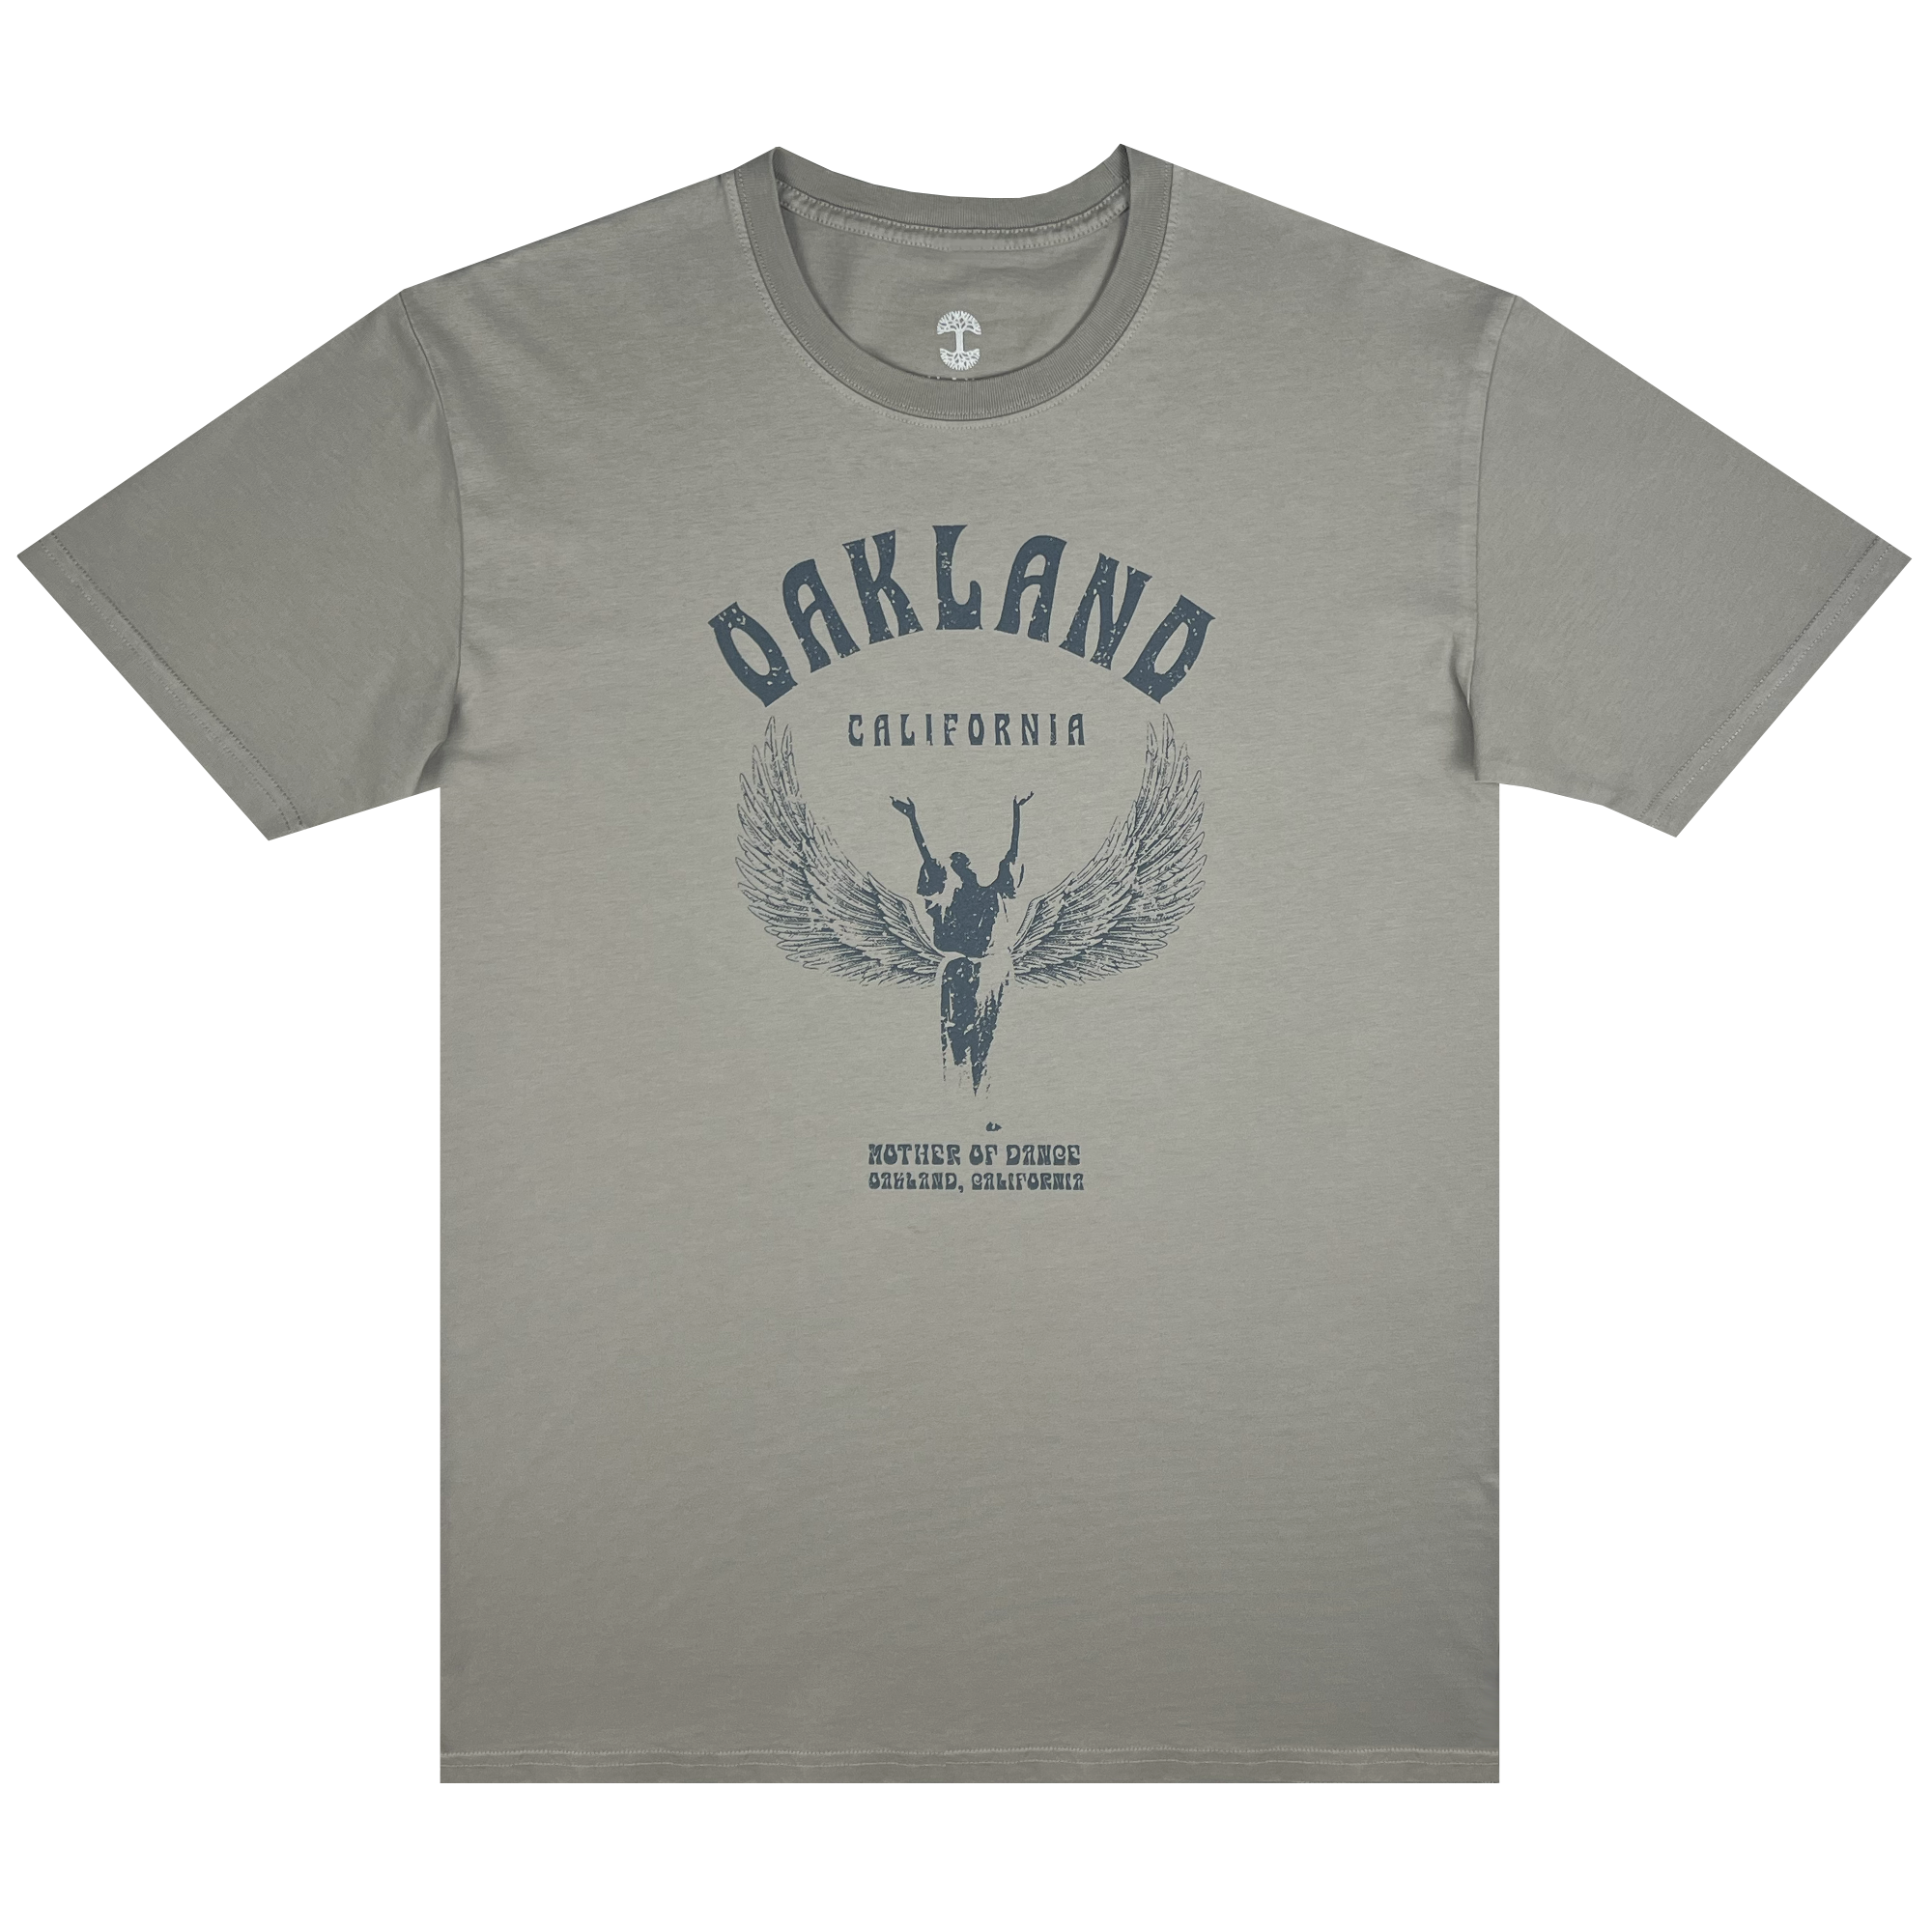 Front view of a dust-colored t-shirt with Oakland California graphic celebrating Isadora Duncan, pioneer of modern dance.